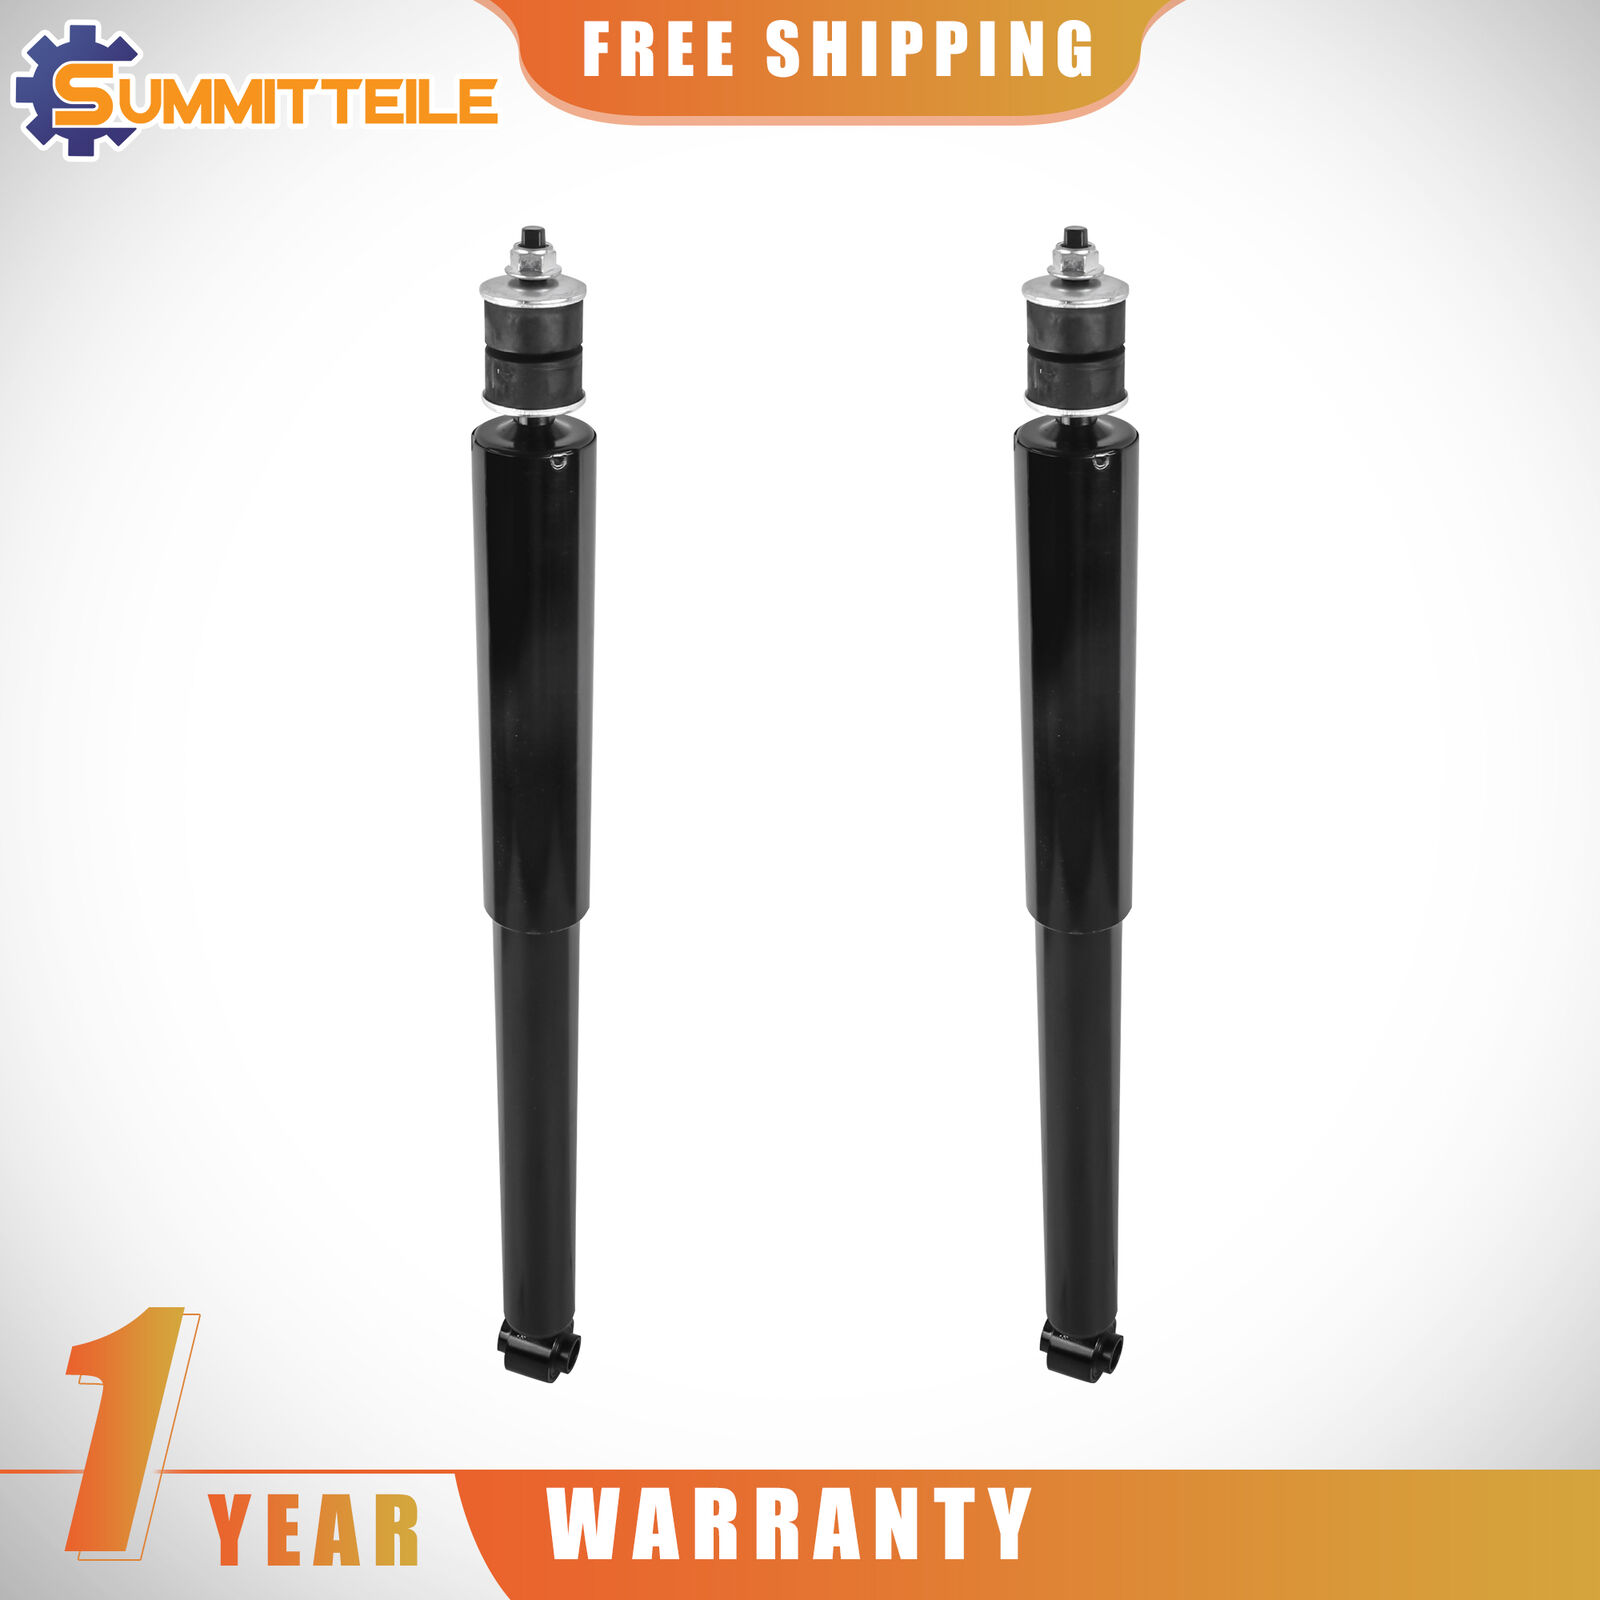 Pair Rear LH+RH Shock Absorbers For 2001-2007 Toyota Sequoia 4.7L 4WD RWD